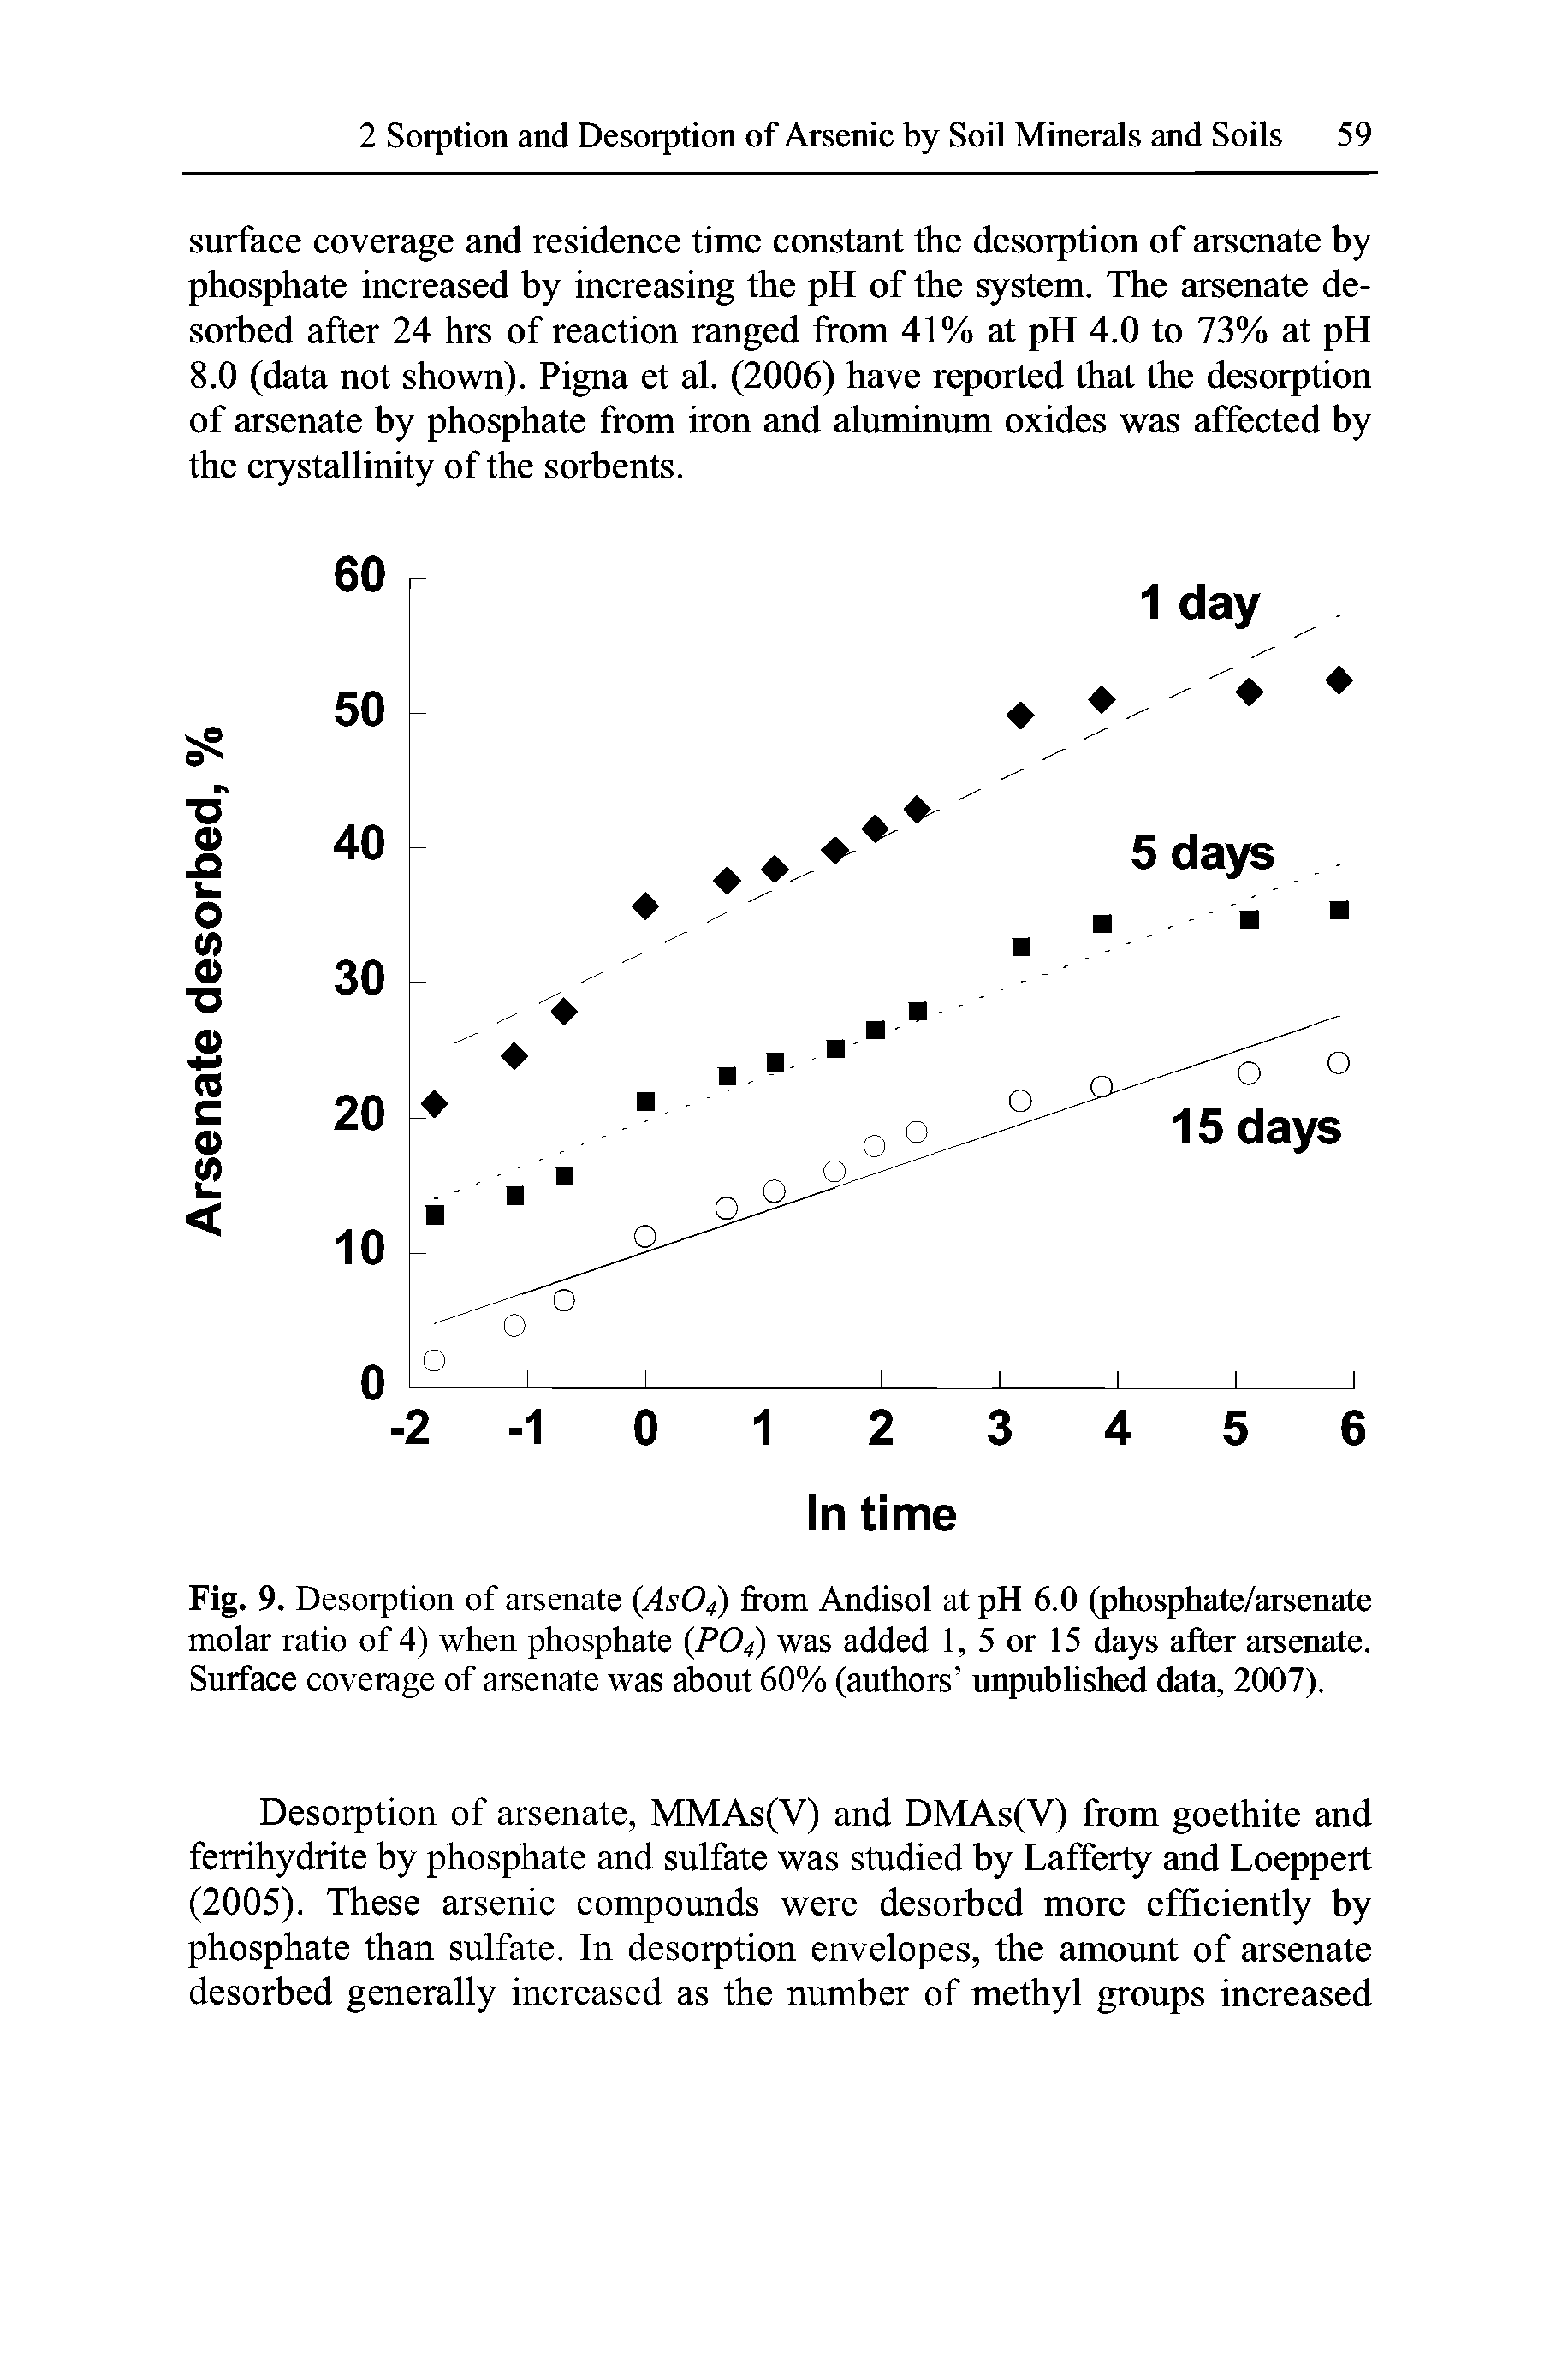 Fig. 9. Desorption of arsenate (As04) from Andisol at pH 6.0 (phosphate/arsenate molar ratio of 4) when phosphate (P04) was added 1, 5 or 15 days after arsenate. Surface coverage of arsenate was about 60% (authors unpublished data, 2007).